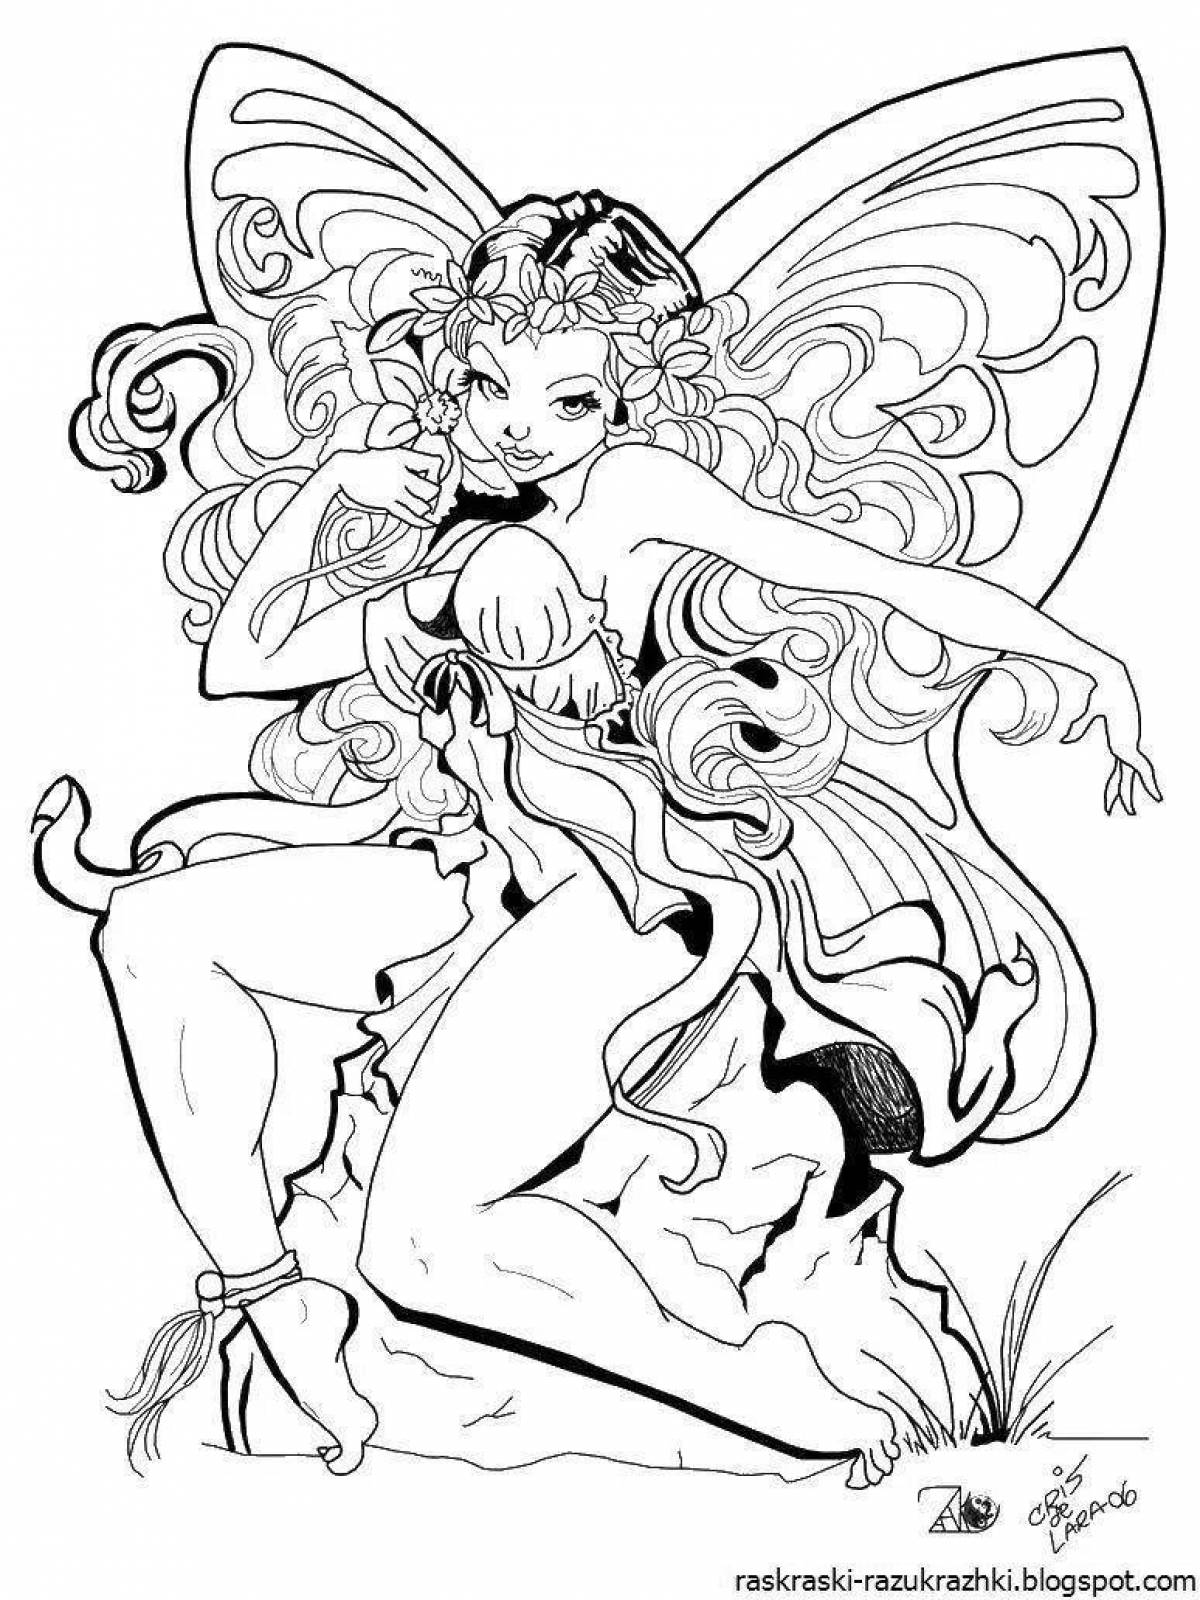 Intriguing adult porn coloring page